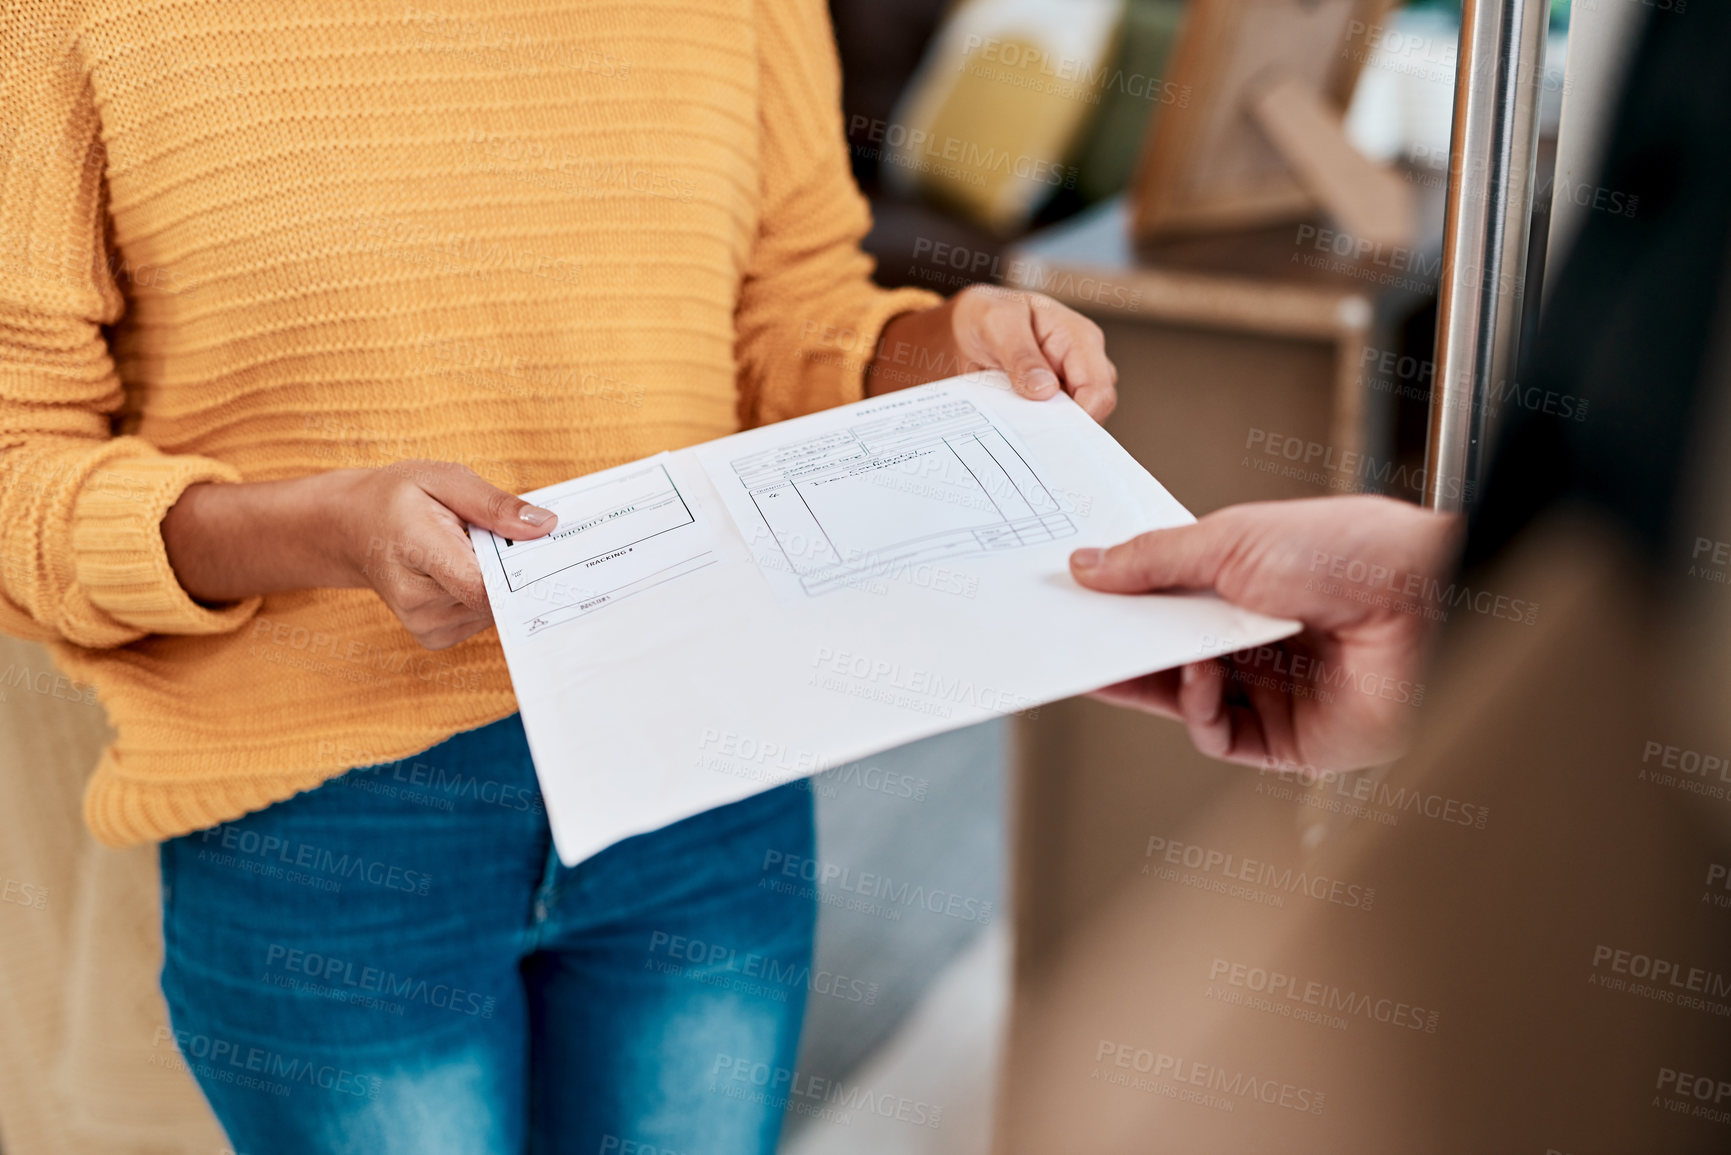 Buy stock photo Cropped shot of a woman receiving an invoice for a delivery at home